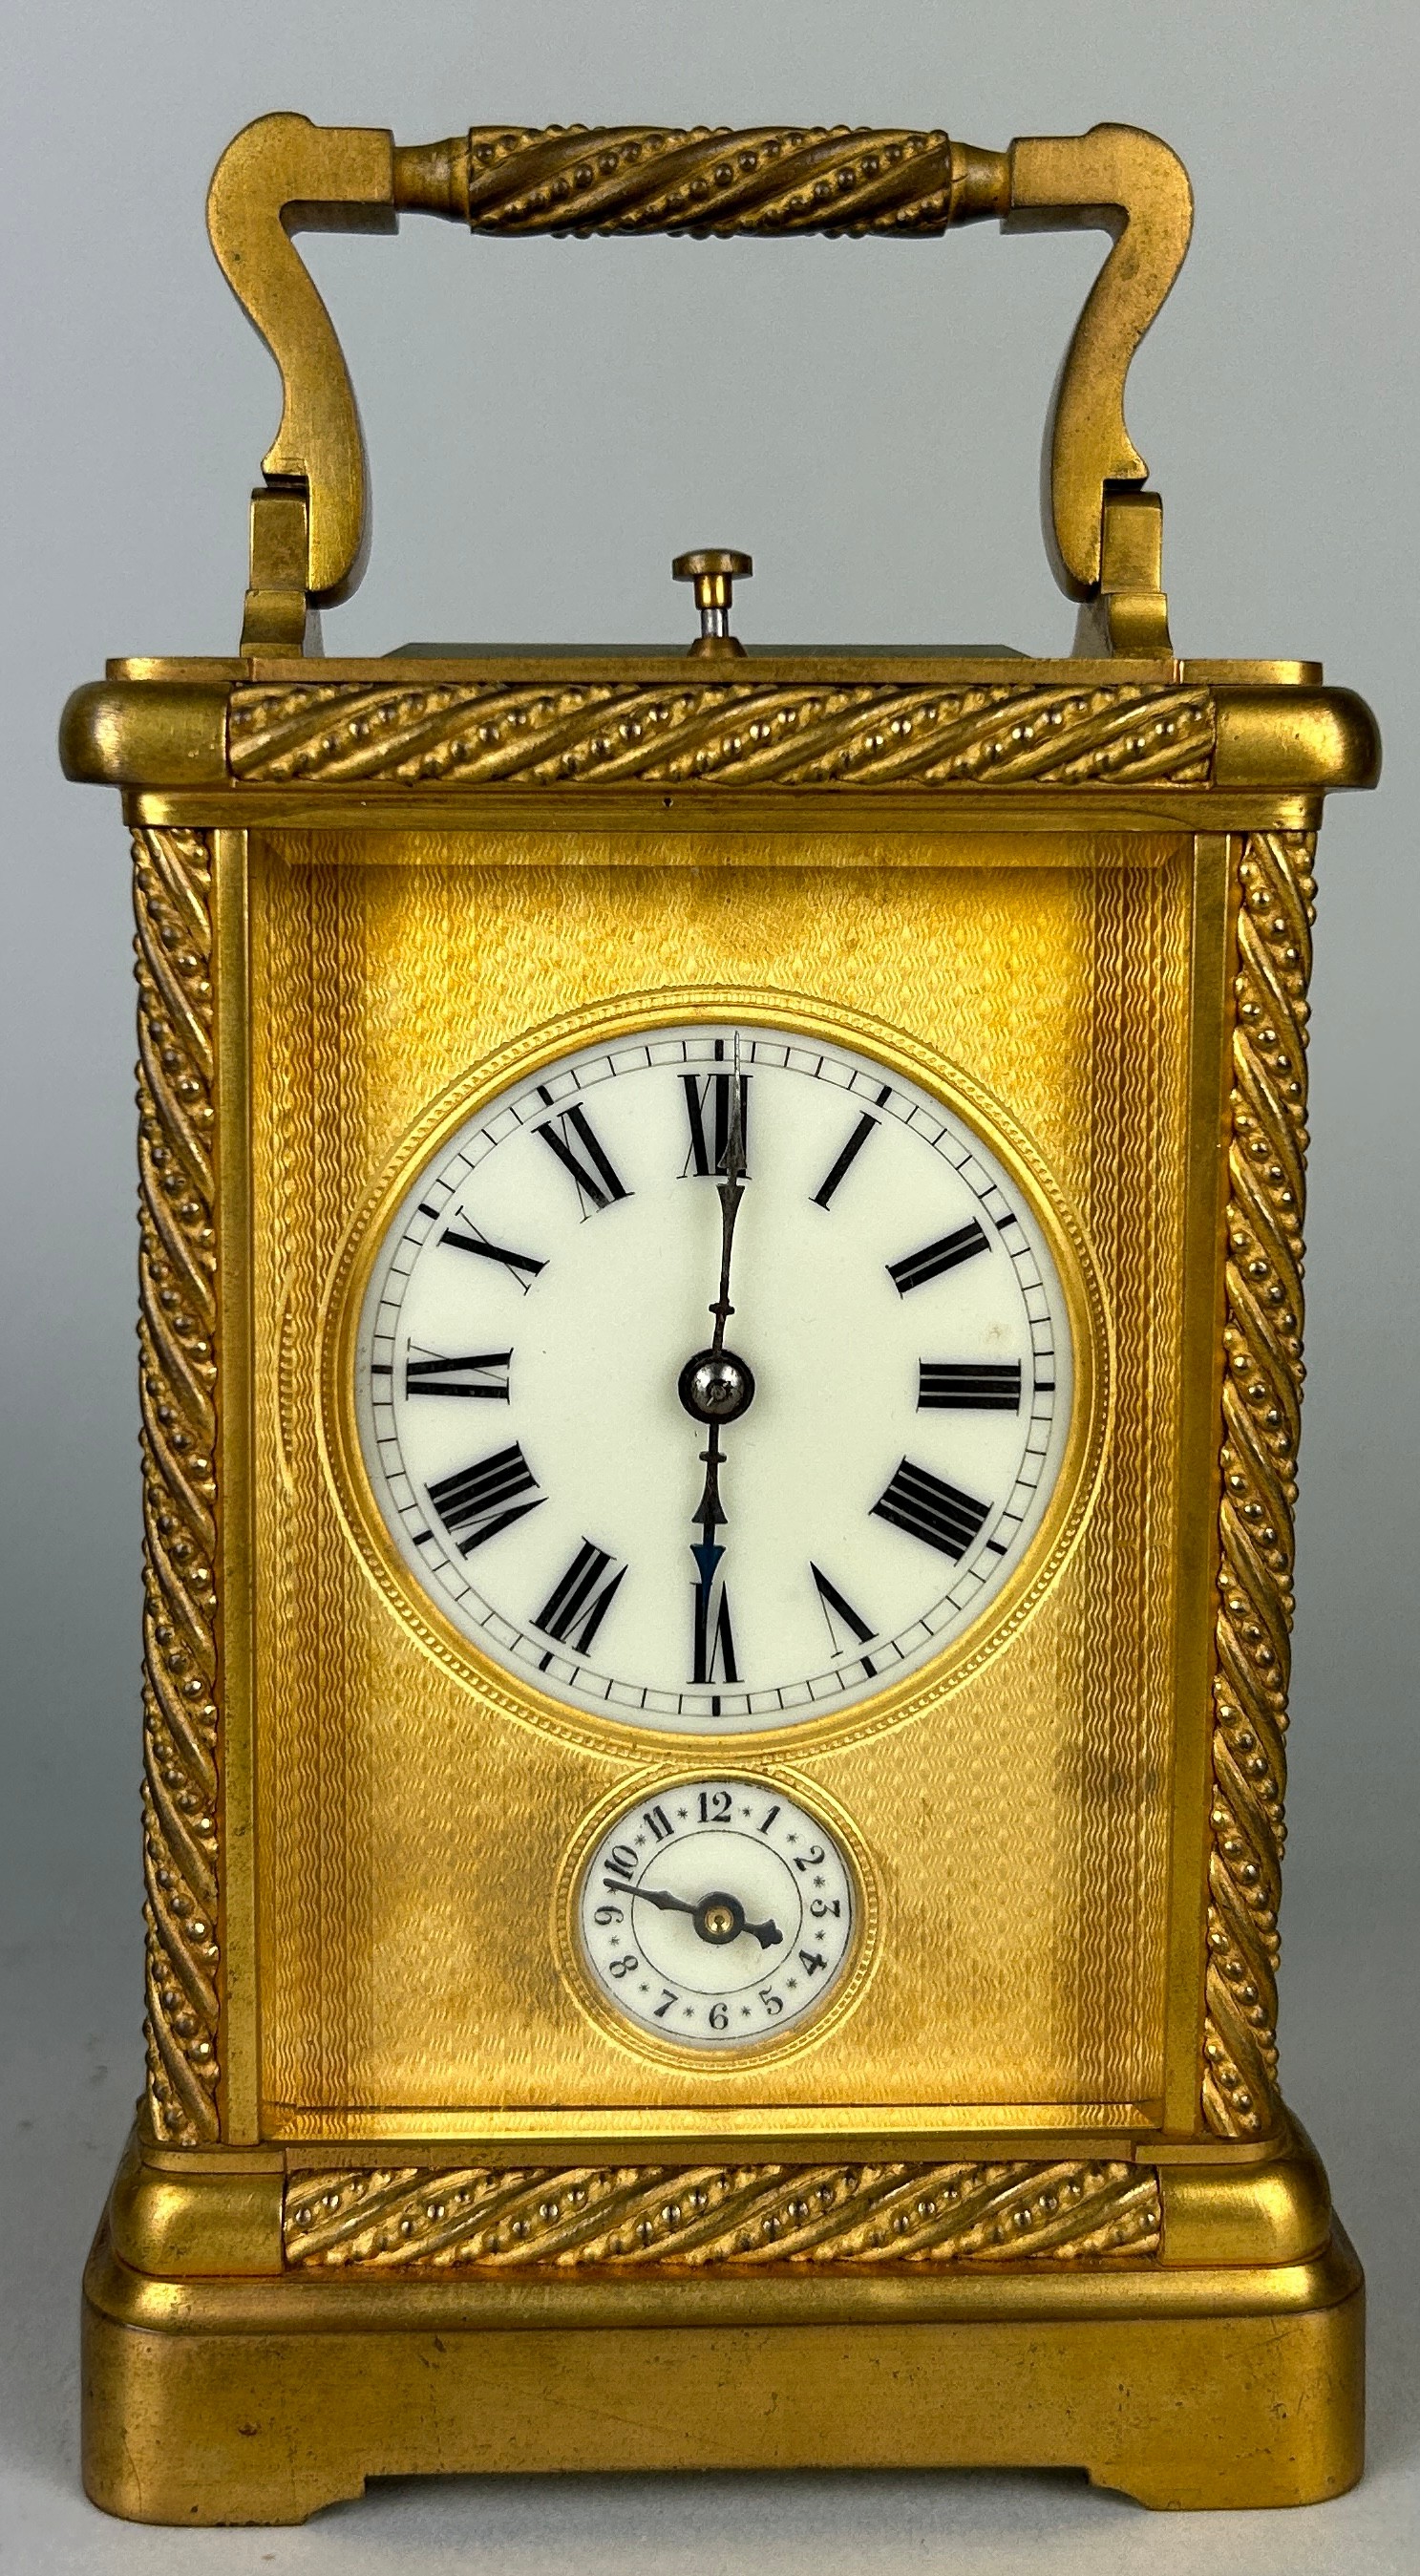 A GOOD CASED 19TH CENTURY FRENCH GILT BRONZE REPEATER CARRIAGE CLOCK WITH ALARM In working order. - Image 2 of 7